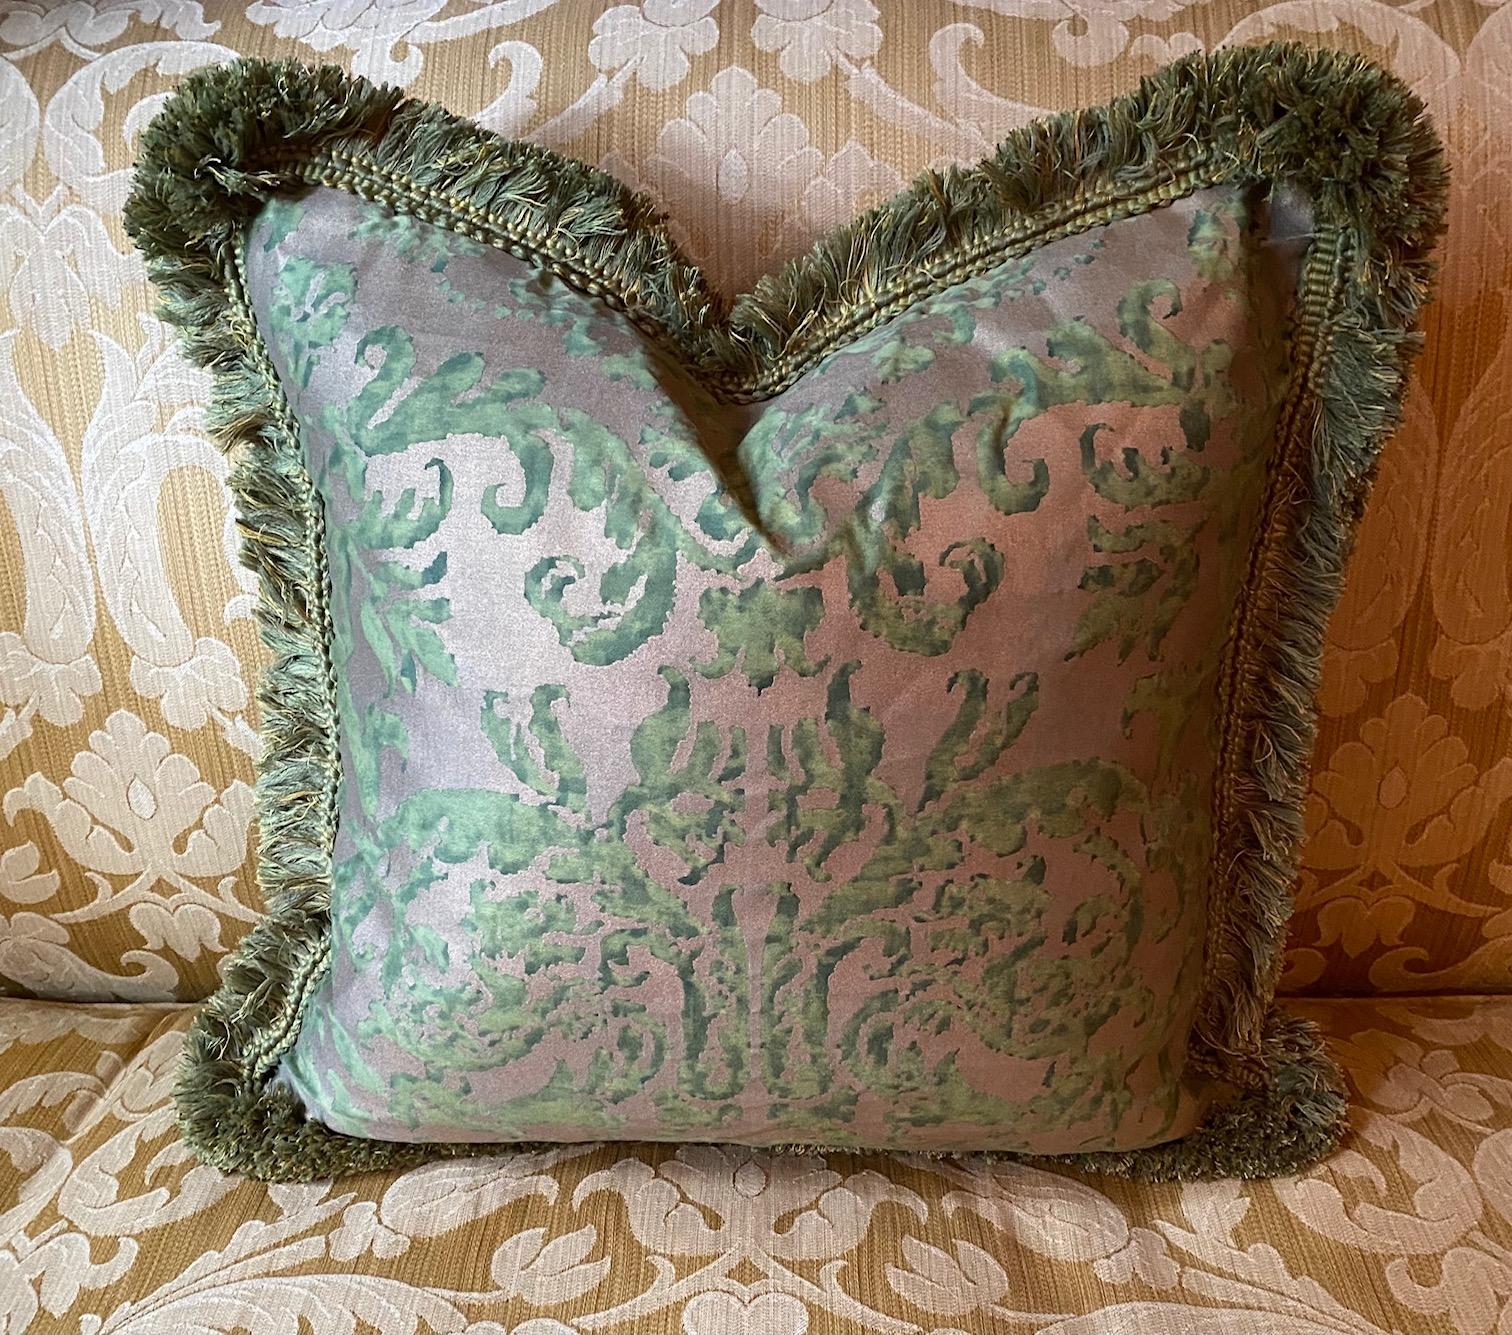 Large and decorative green-on-silver Fortuny down-filled cushions with brush fringe and green velvet backing

'Farnese' pattern

20